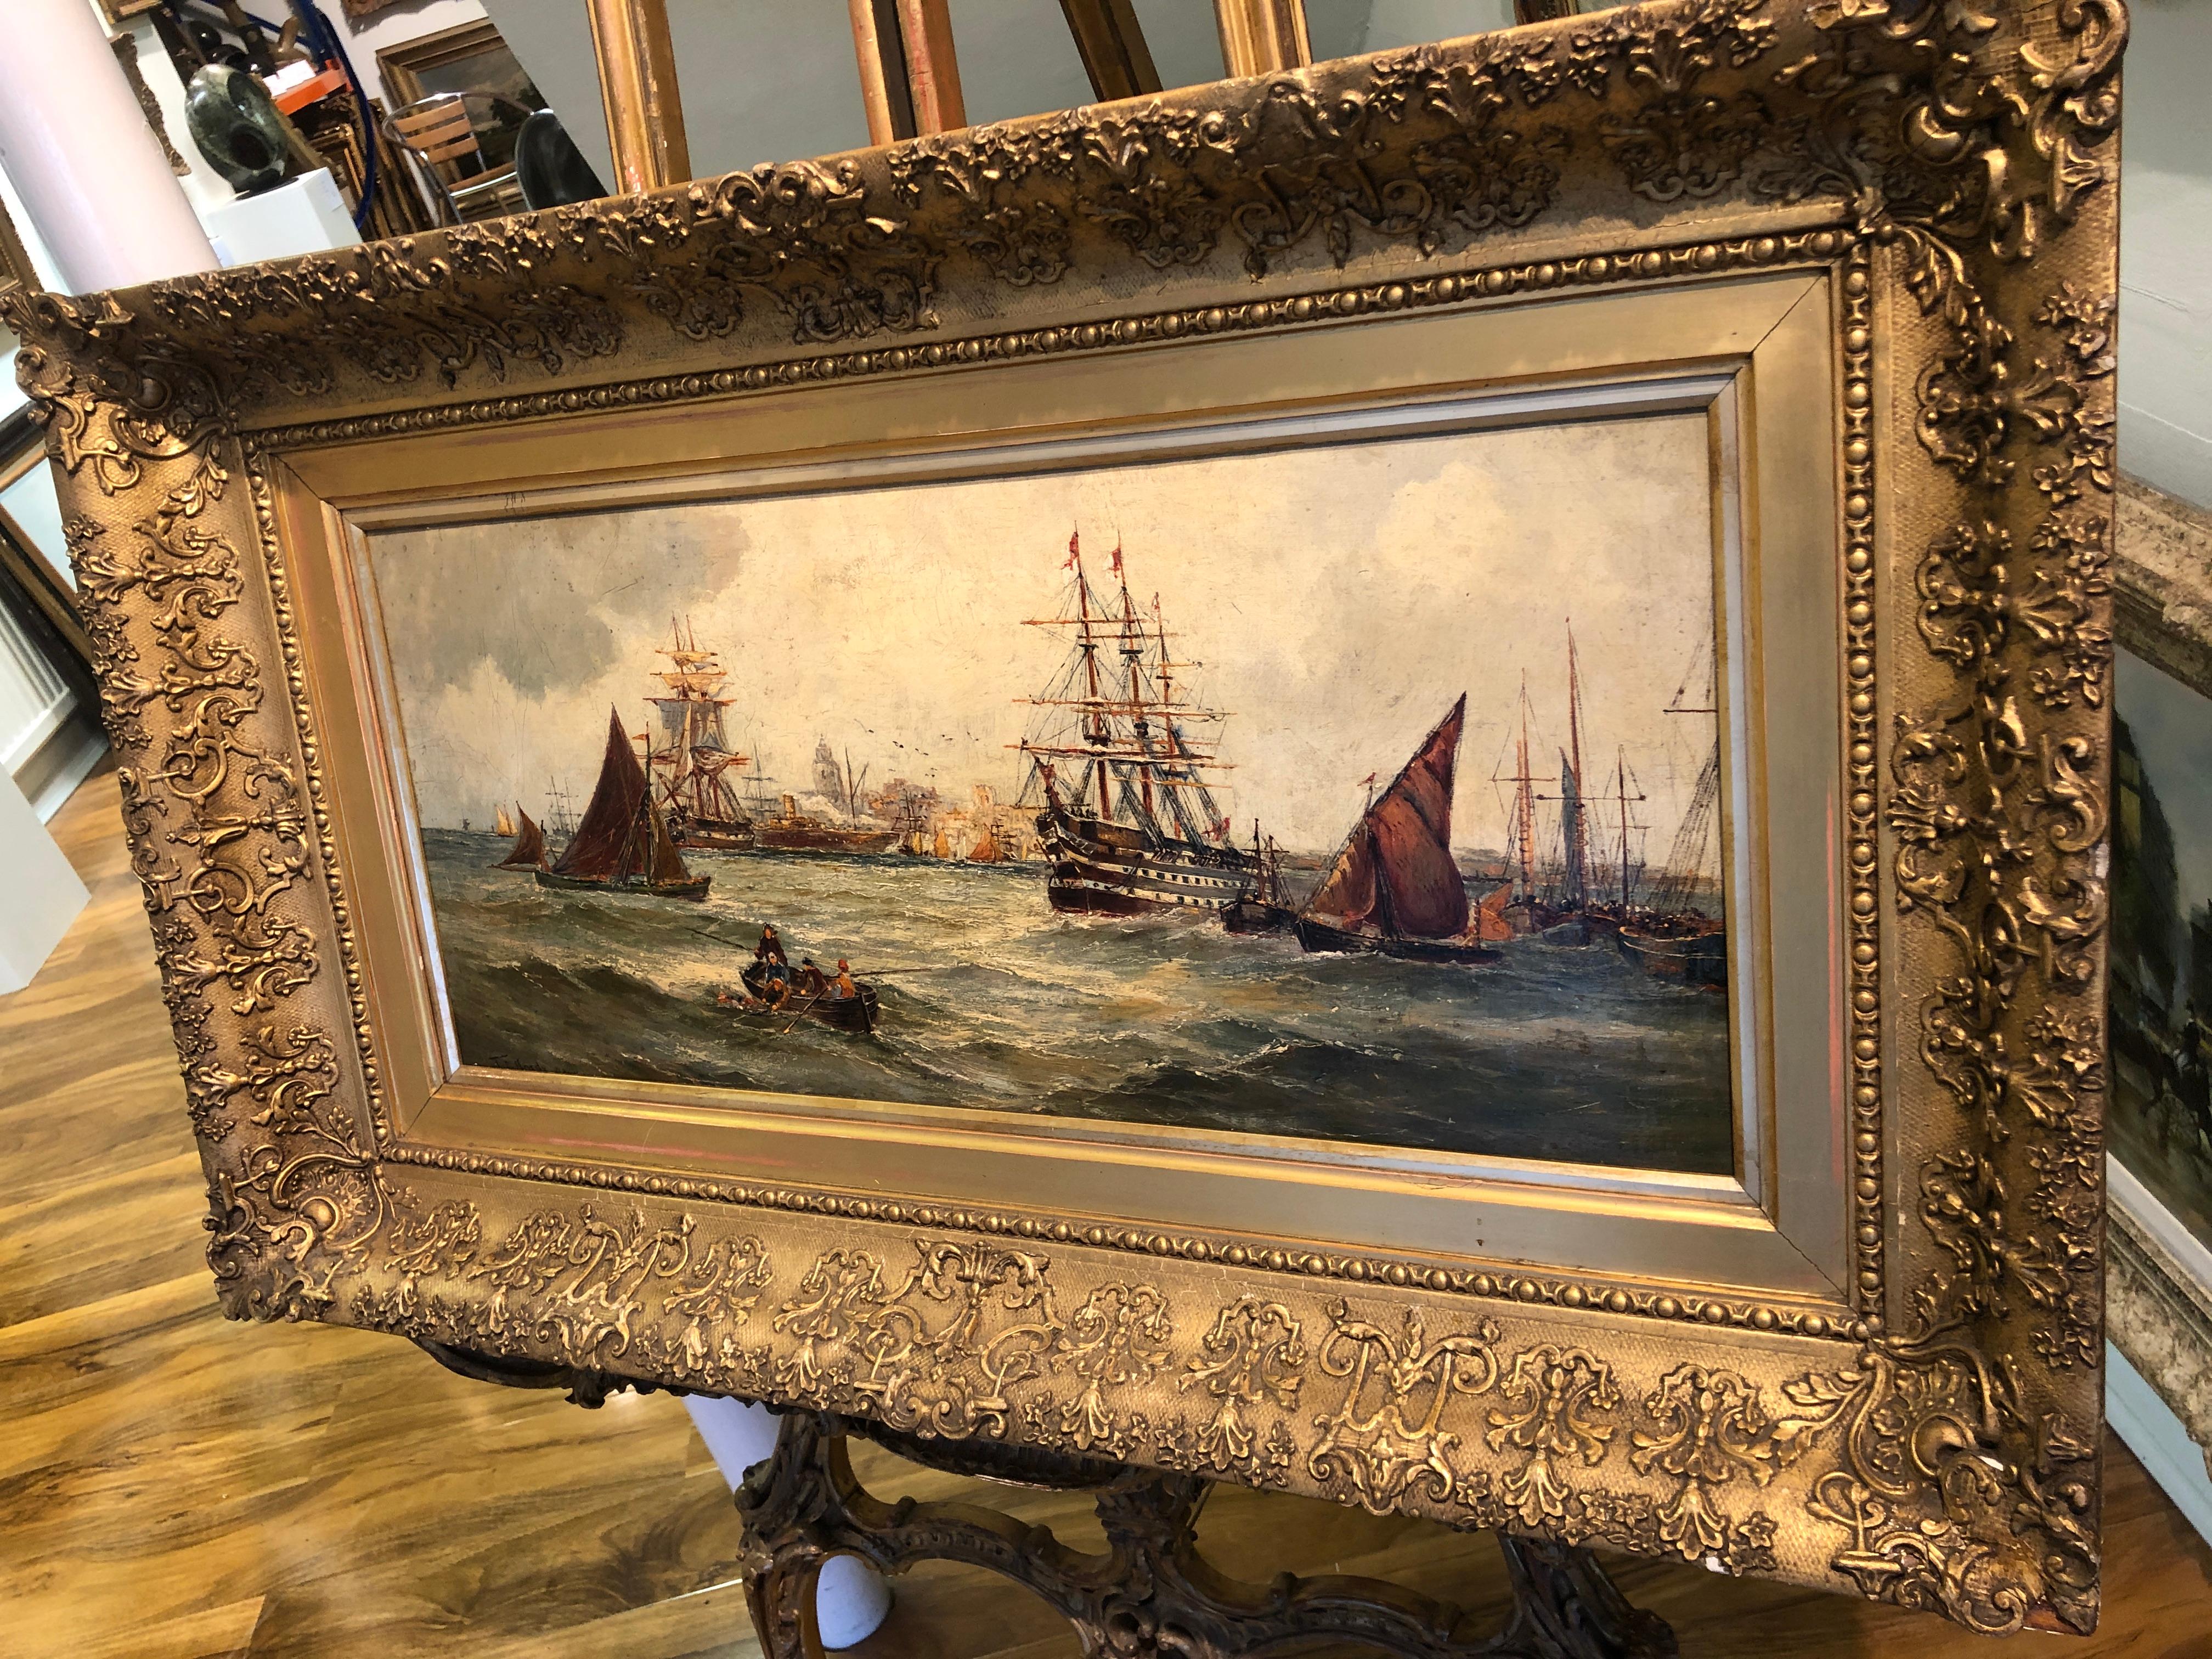 OLD MASTER Large OIL PAINTING 18th CENTURY NAVEL HARBOUR

OLD MASTER LARGE OIL PAINTING  

18th Century

NEW COLLECTION Of RARE PIECES OF ENGLISH HISTORY

“ Very Good  condition panel ..Piece has been professional cleaned

  Frame is in Good